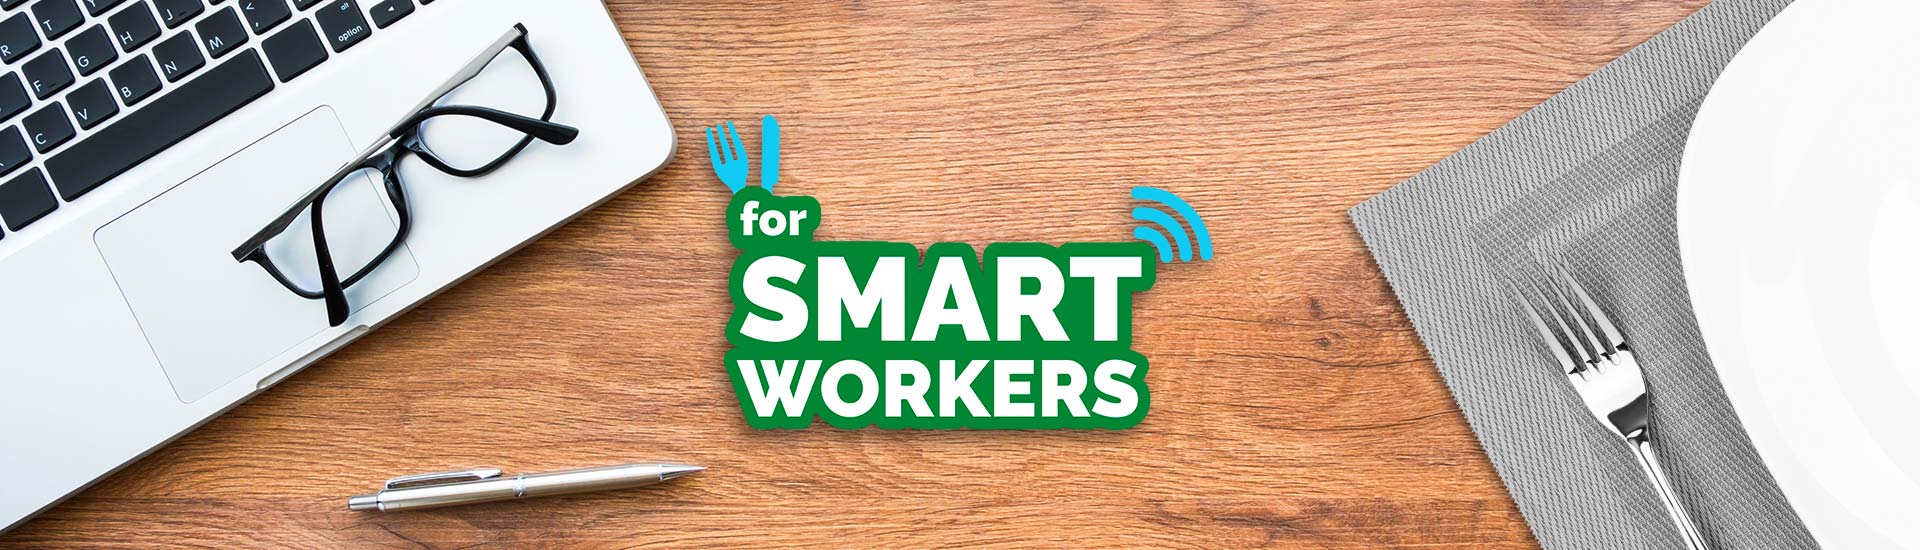 For smart workers